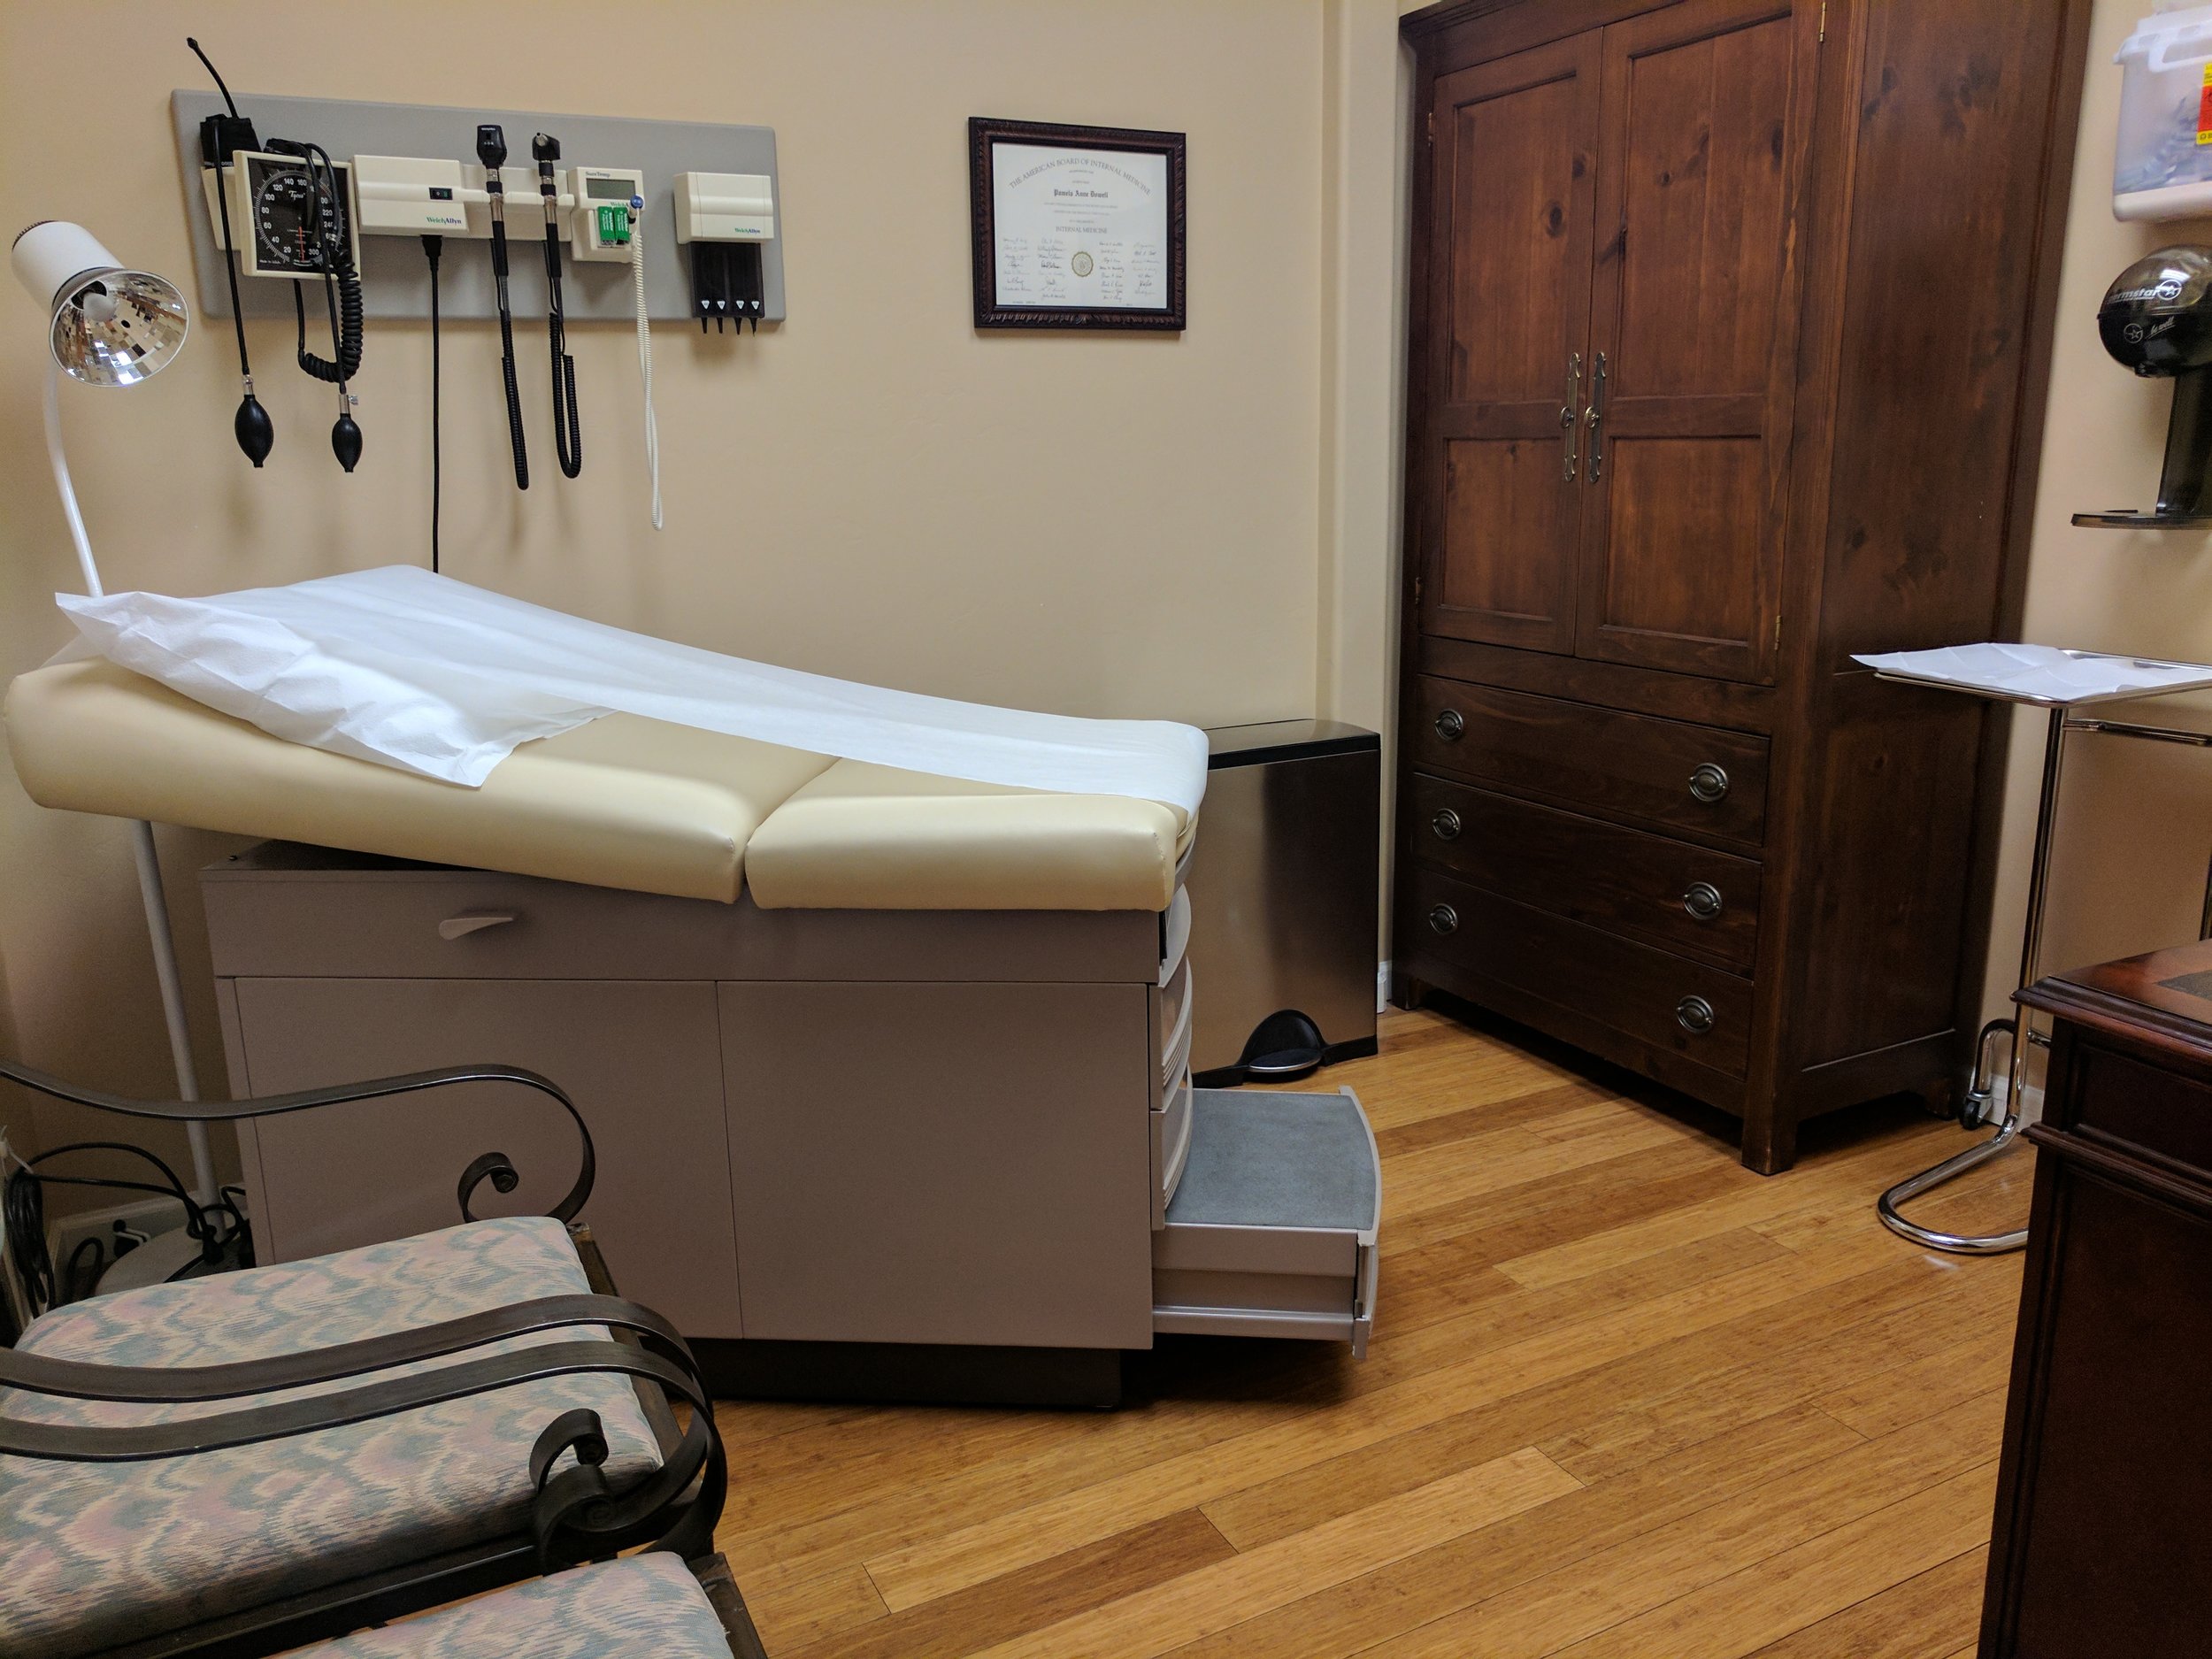 Our Patient Room